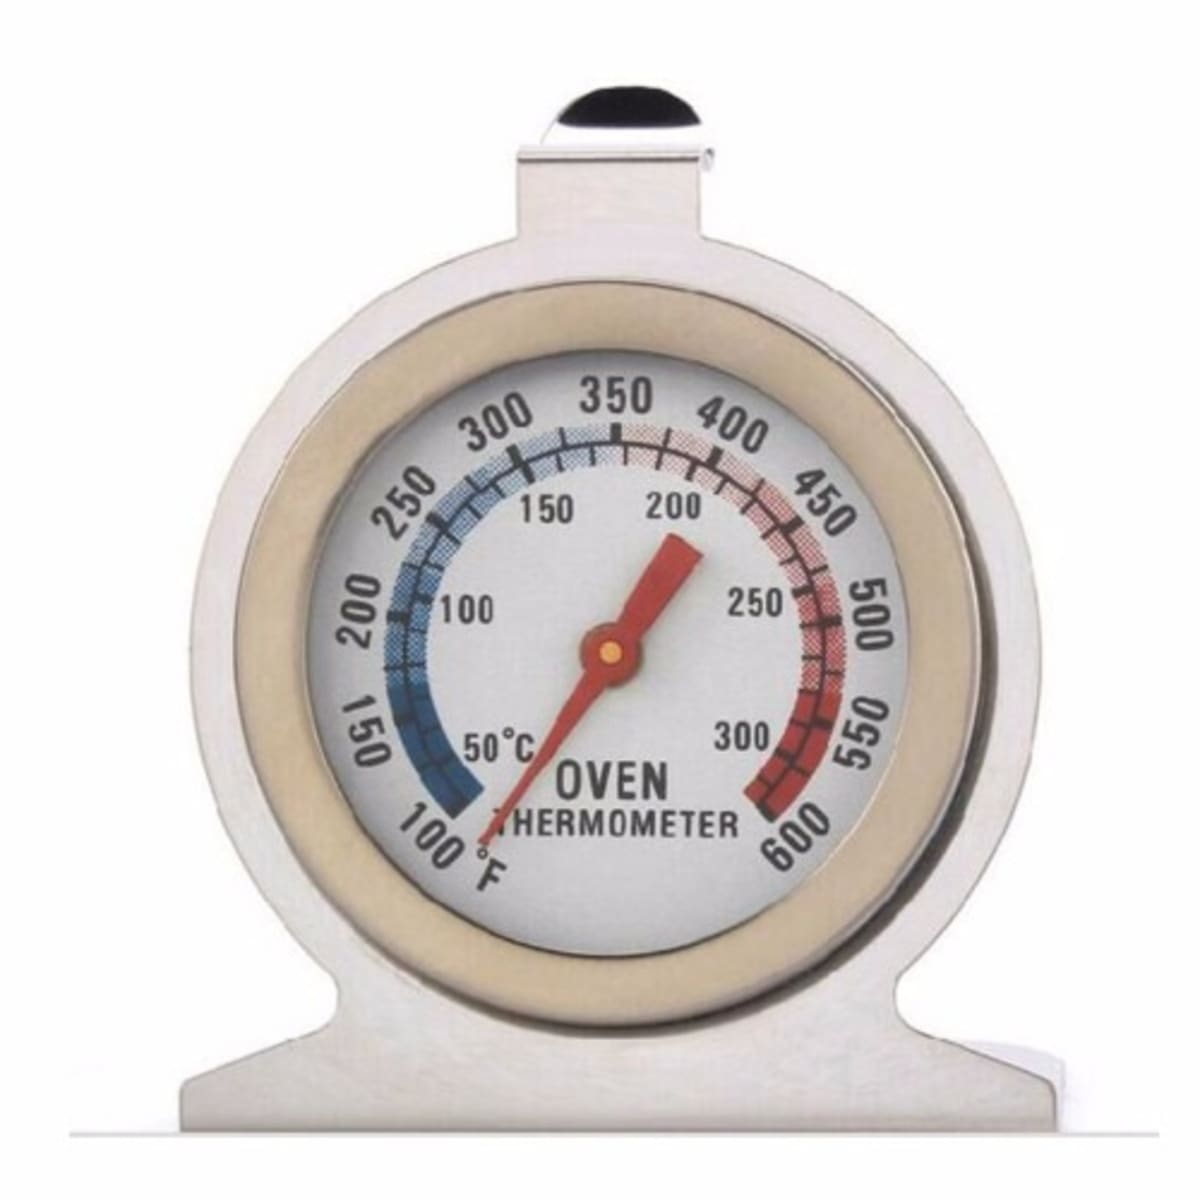 https://www-konga-com-res.cloudinary.com/w_400,f_auto,fl_lossy,dpr_3.0,q_auto/media/catalog/product/U/n/Universal-Kitchen-Cooking-Temperature-Stand-Up-Dial-Oven-Thermometer-Gauge-7707046.jpg